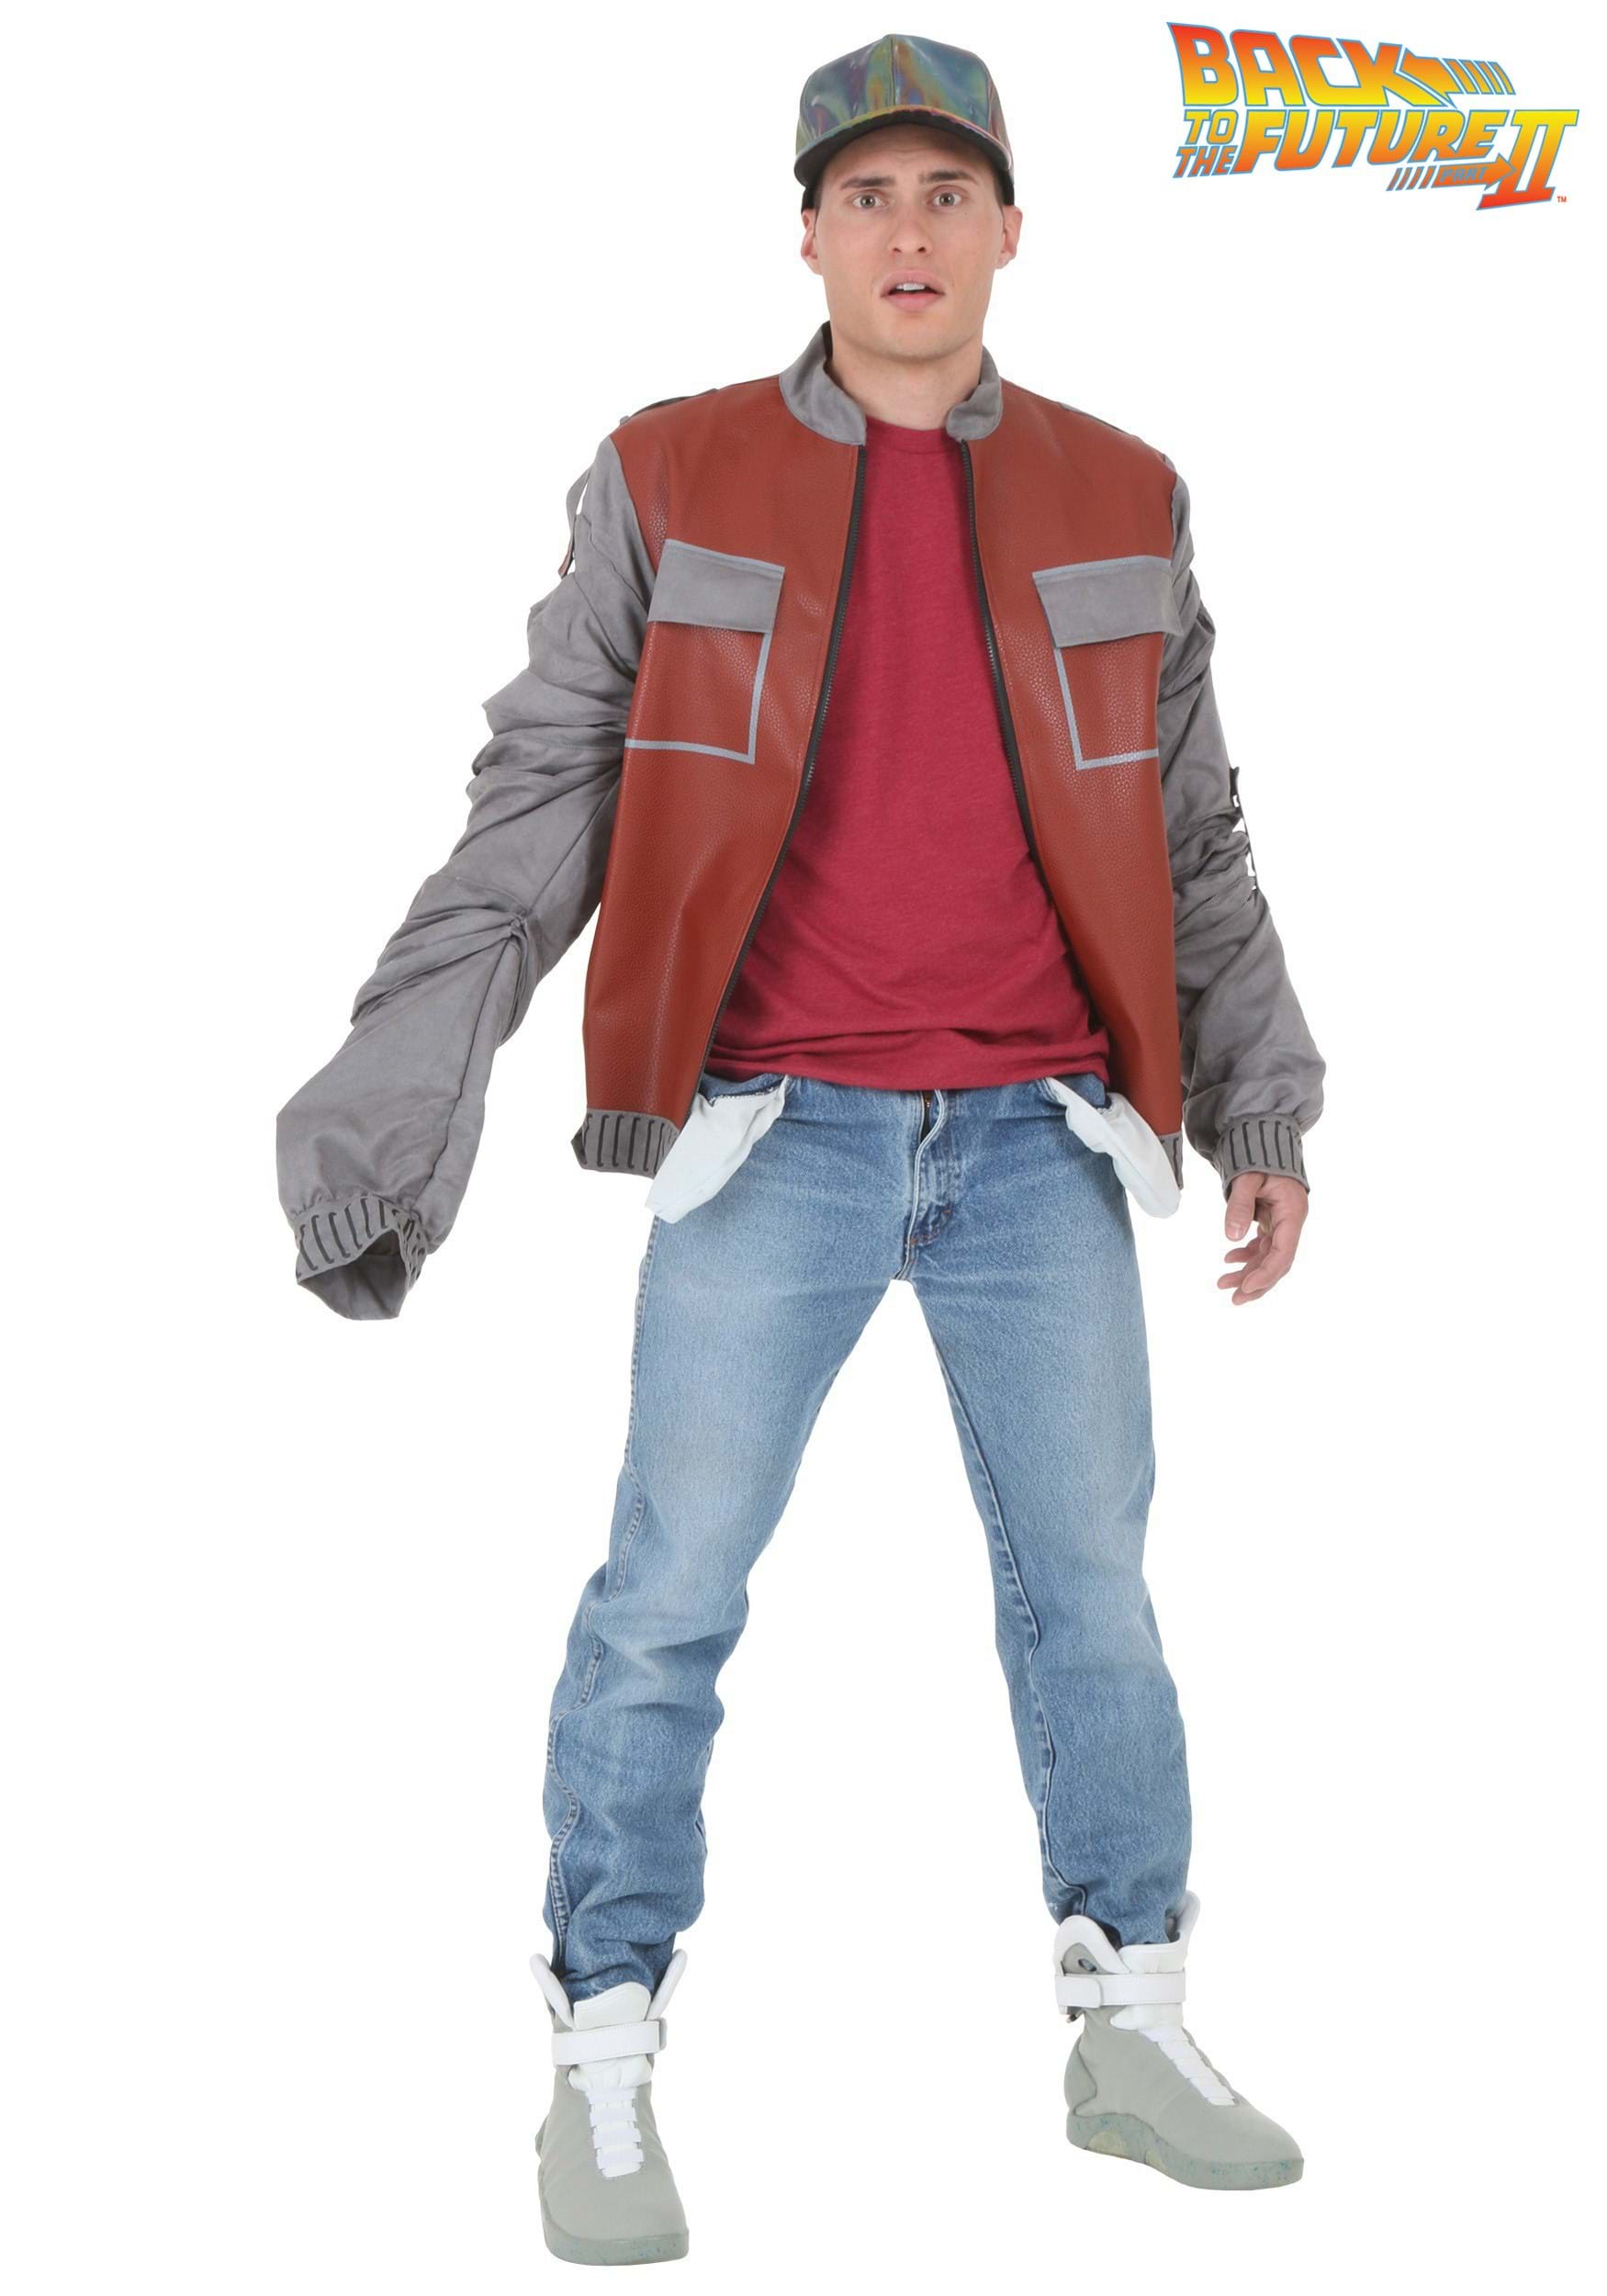 Back to The Future II Marty McFly Costume Jacket Costume